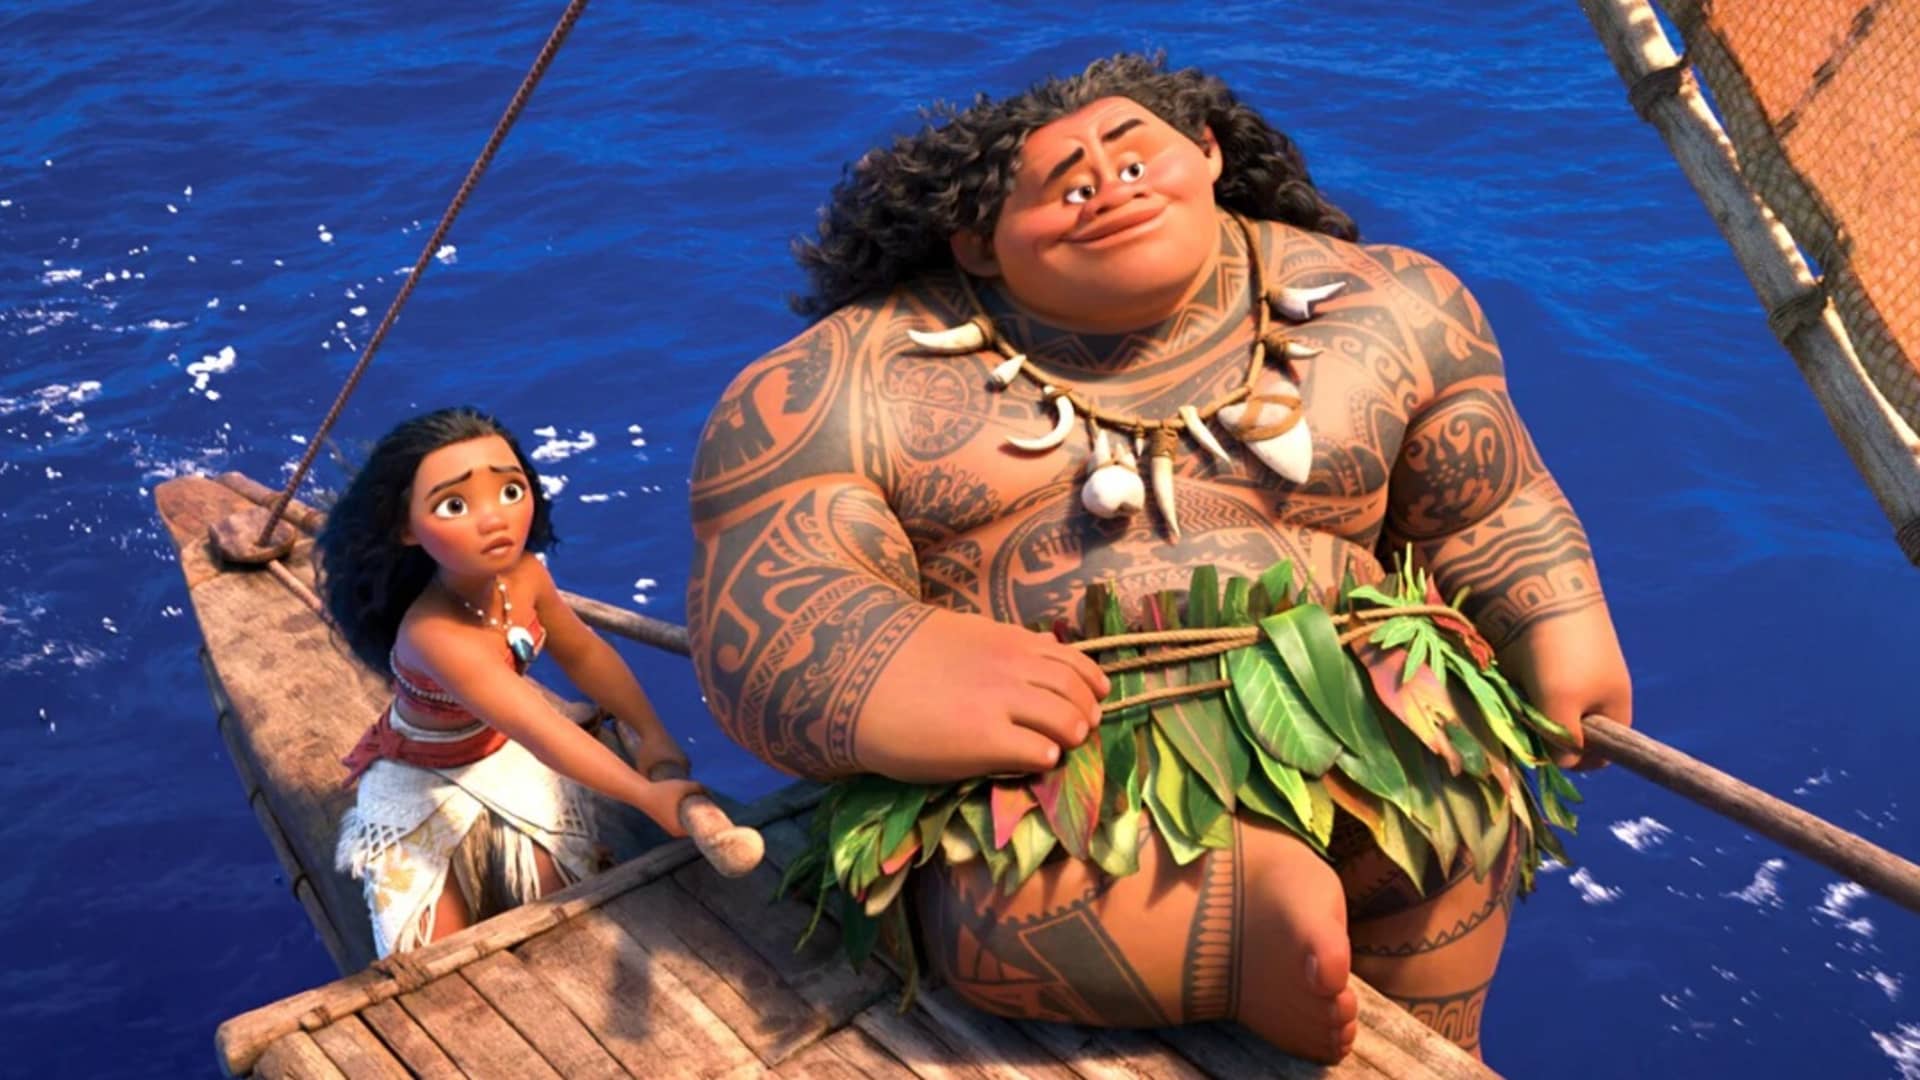 Disney is releasing a ‘Moana’ sequel in theaters this Thanksgiving